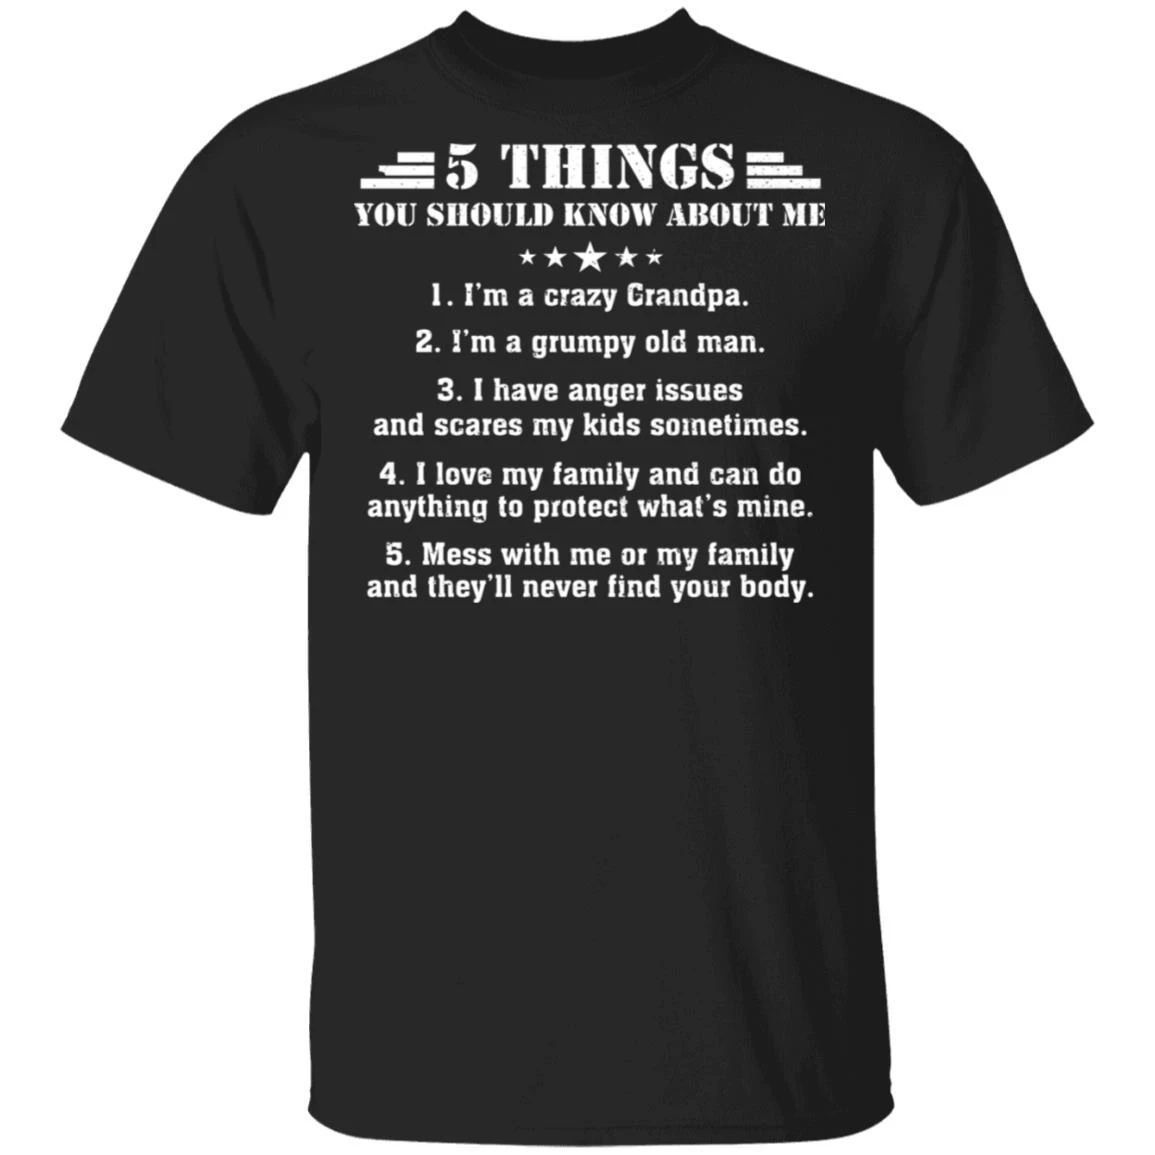 5 Things You Should Know About Me Grandpa T-shirt VA05-Bounce Tee